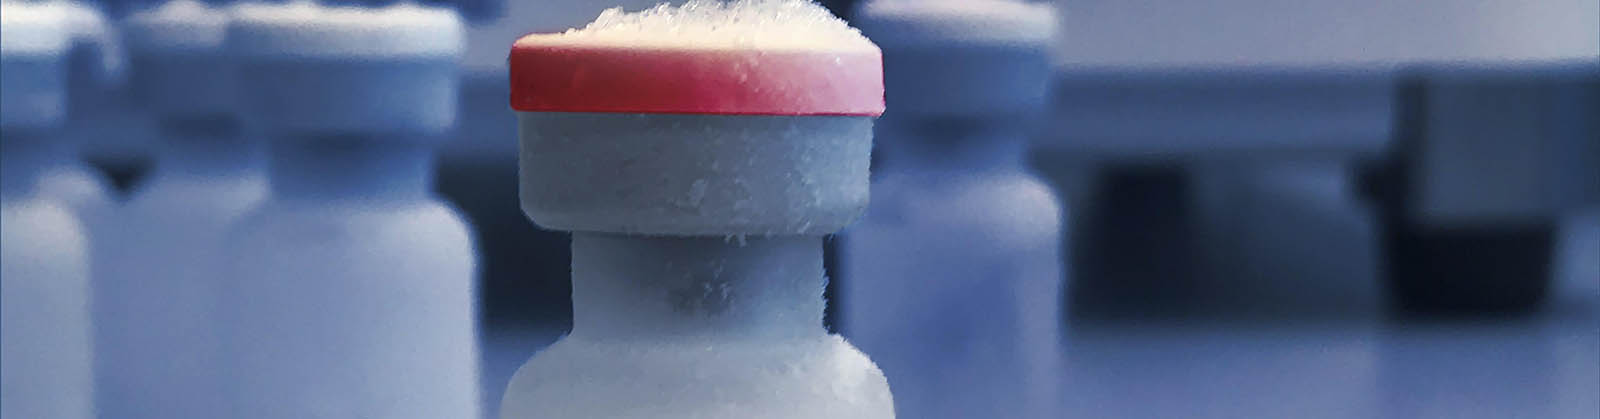 cold vial image 1600 x 400